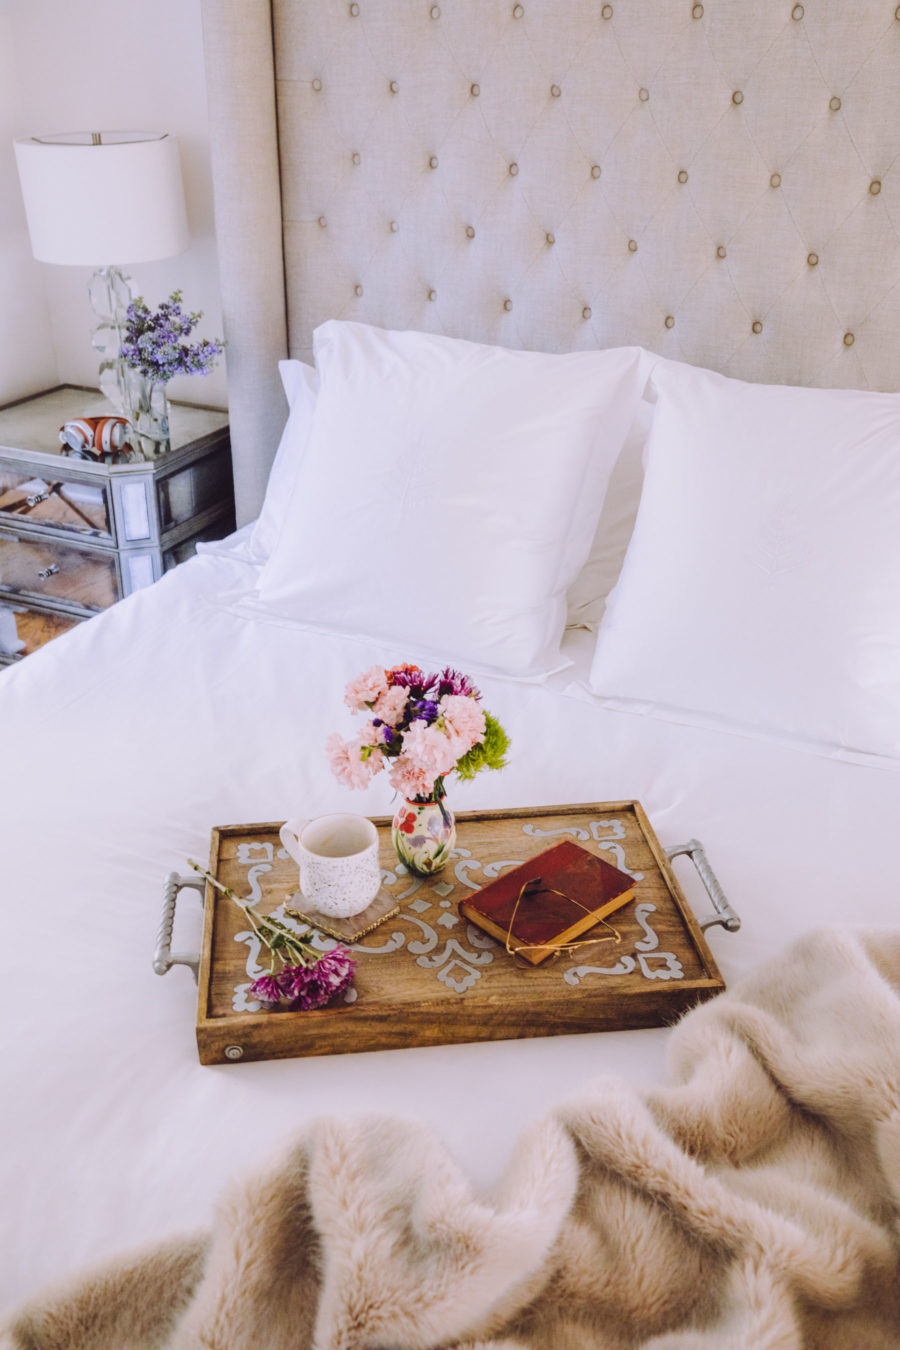 four seasons at home bedding review by blogger jessica wang // Notjessfashion.com